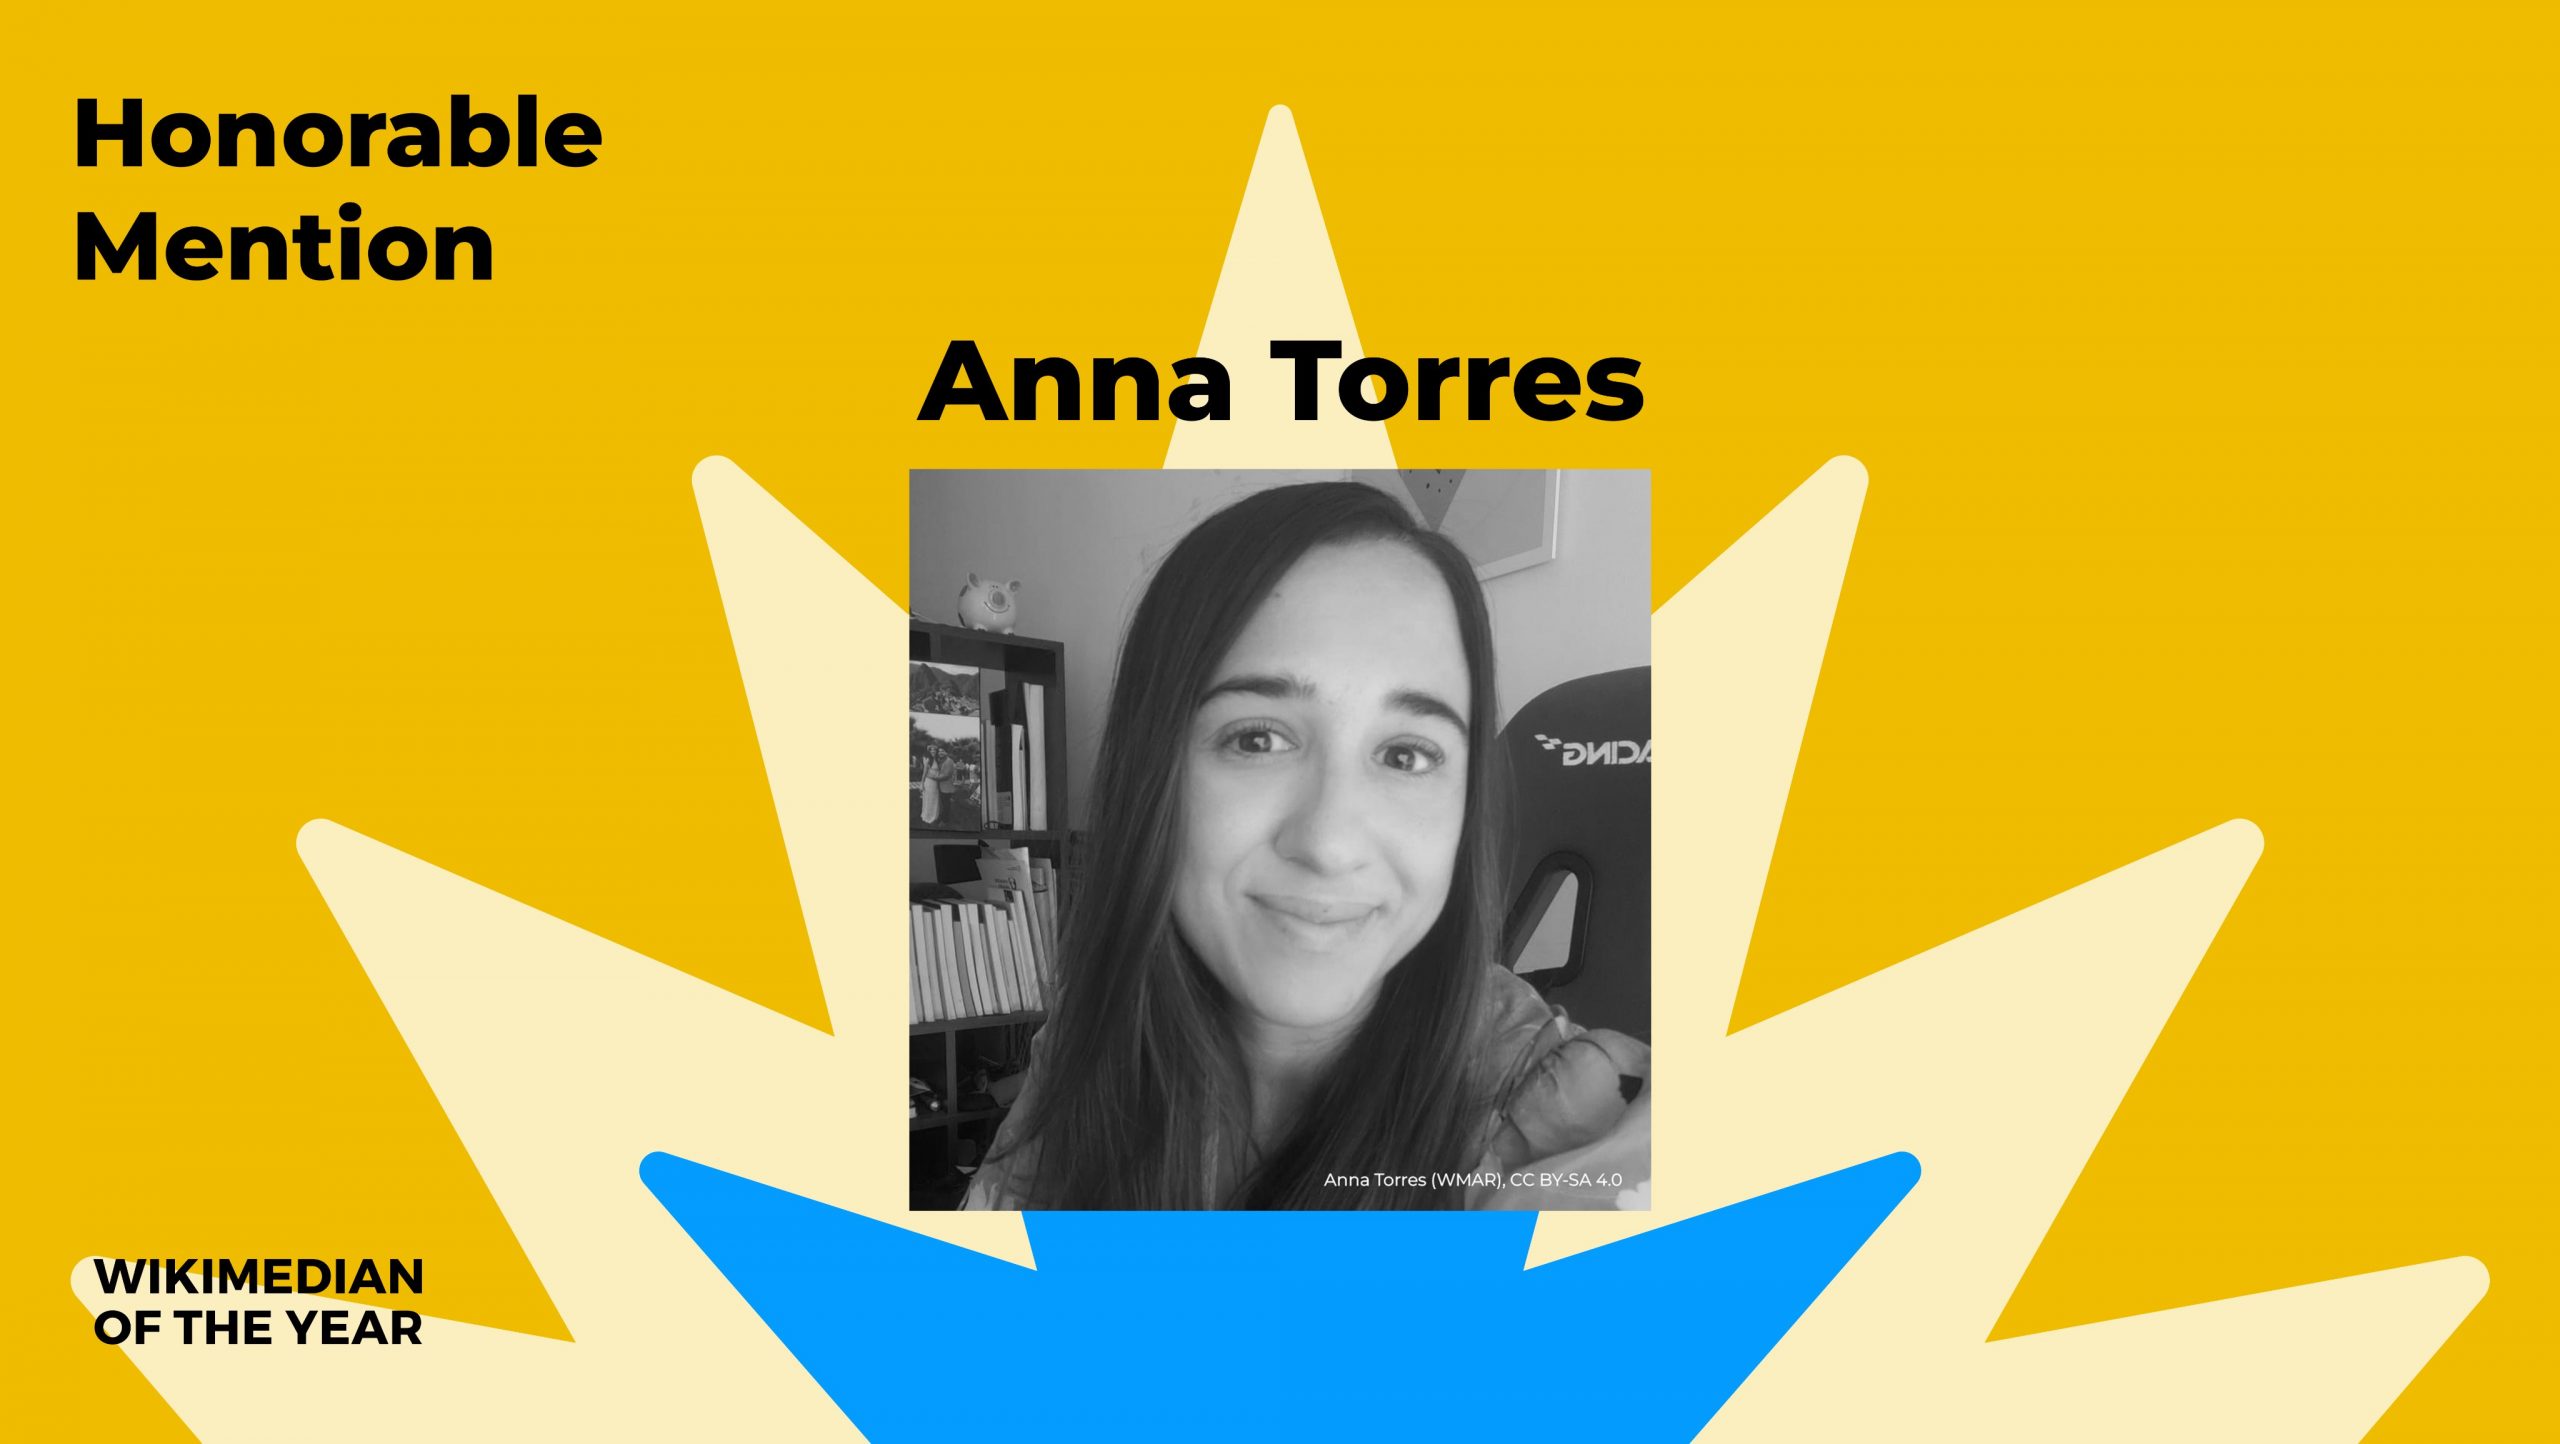 Wikimania Honorable Mention 2022 Anna Torres